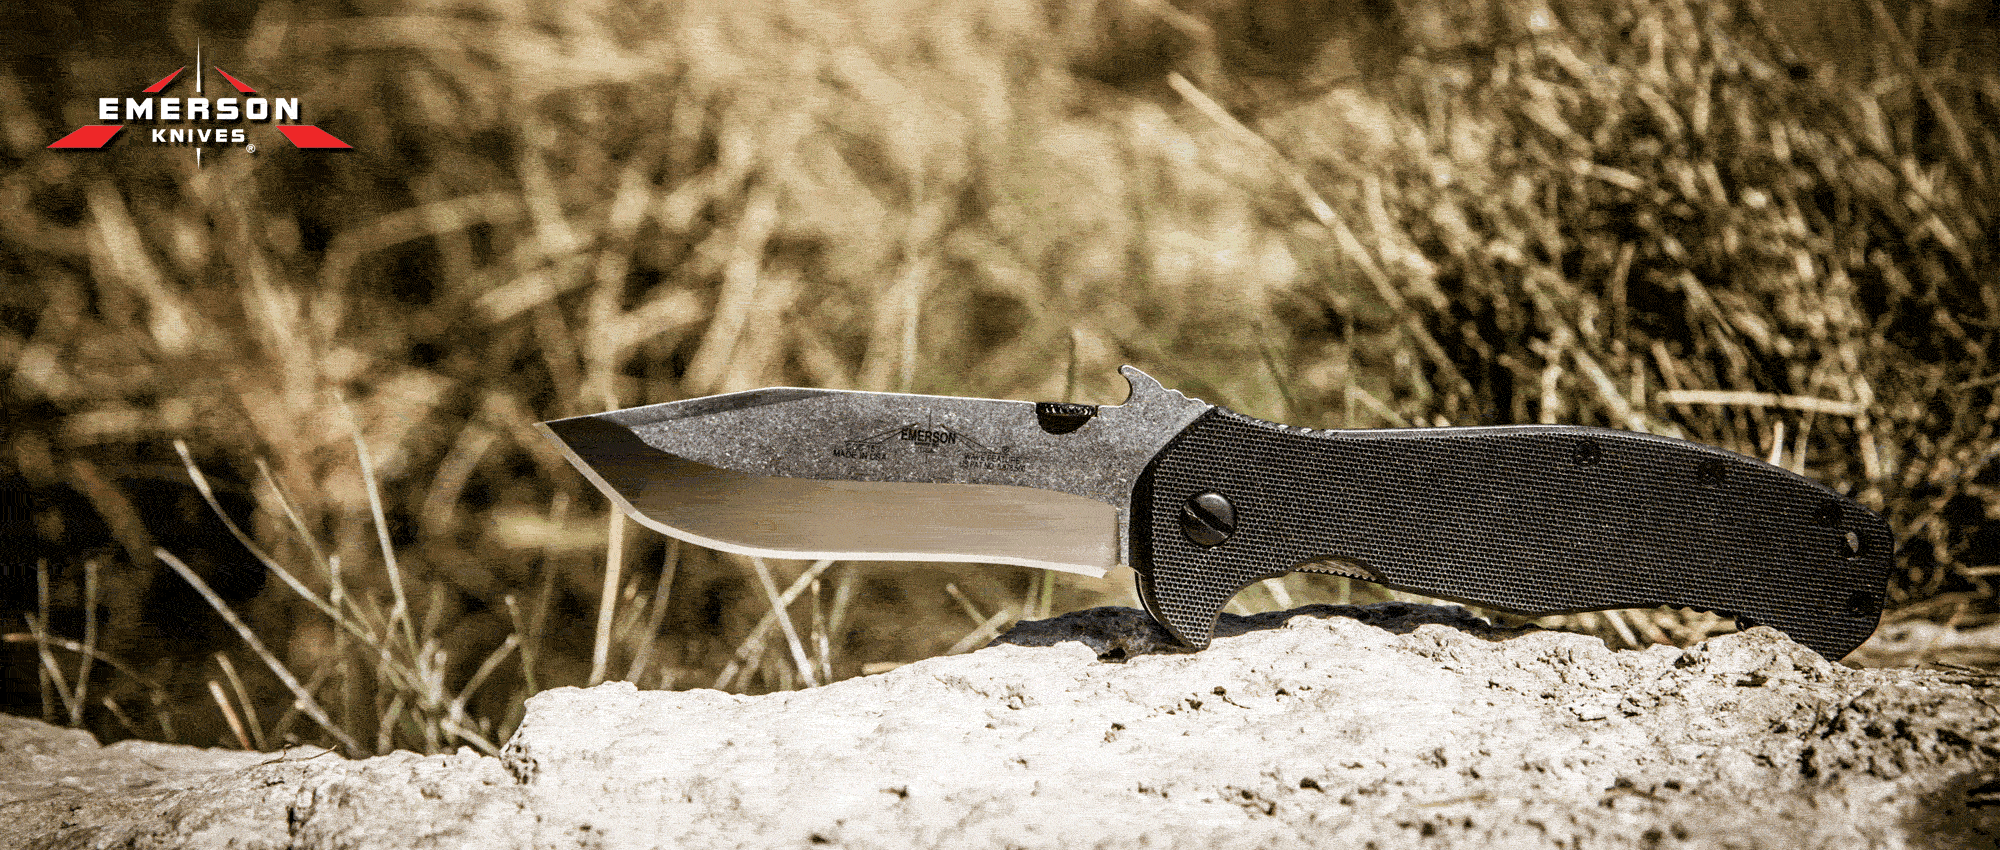 The CQC-15 Knife | Combo Blade | Emerson Knives, Inc.